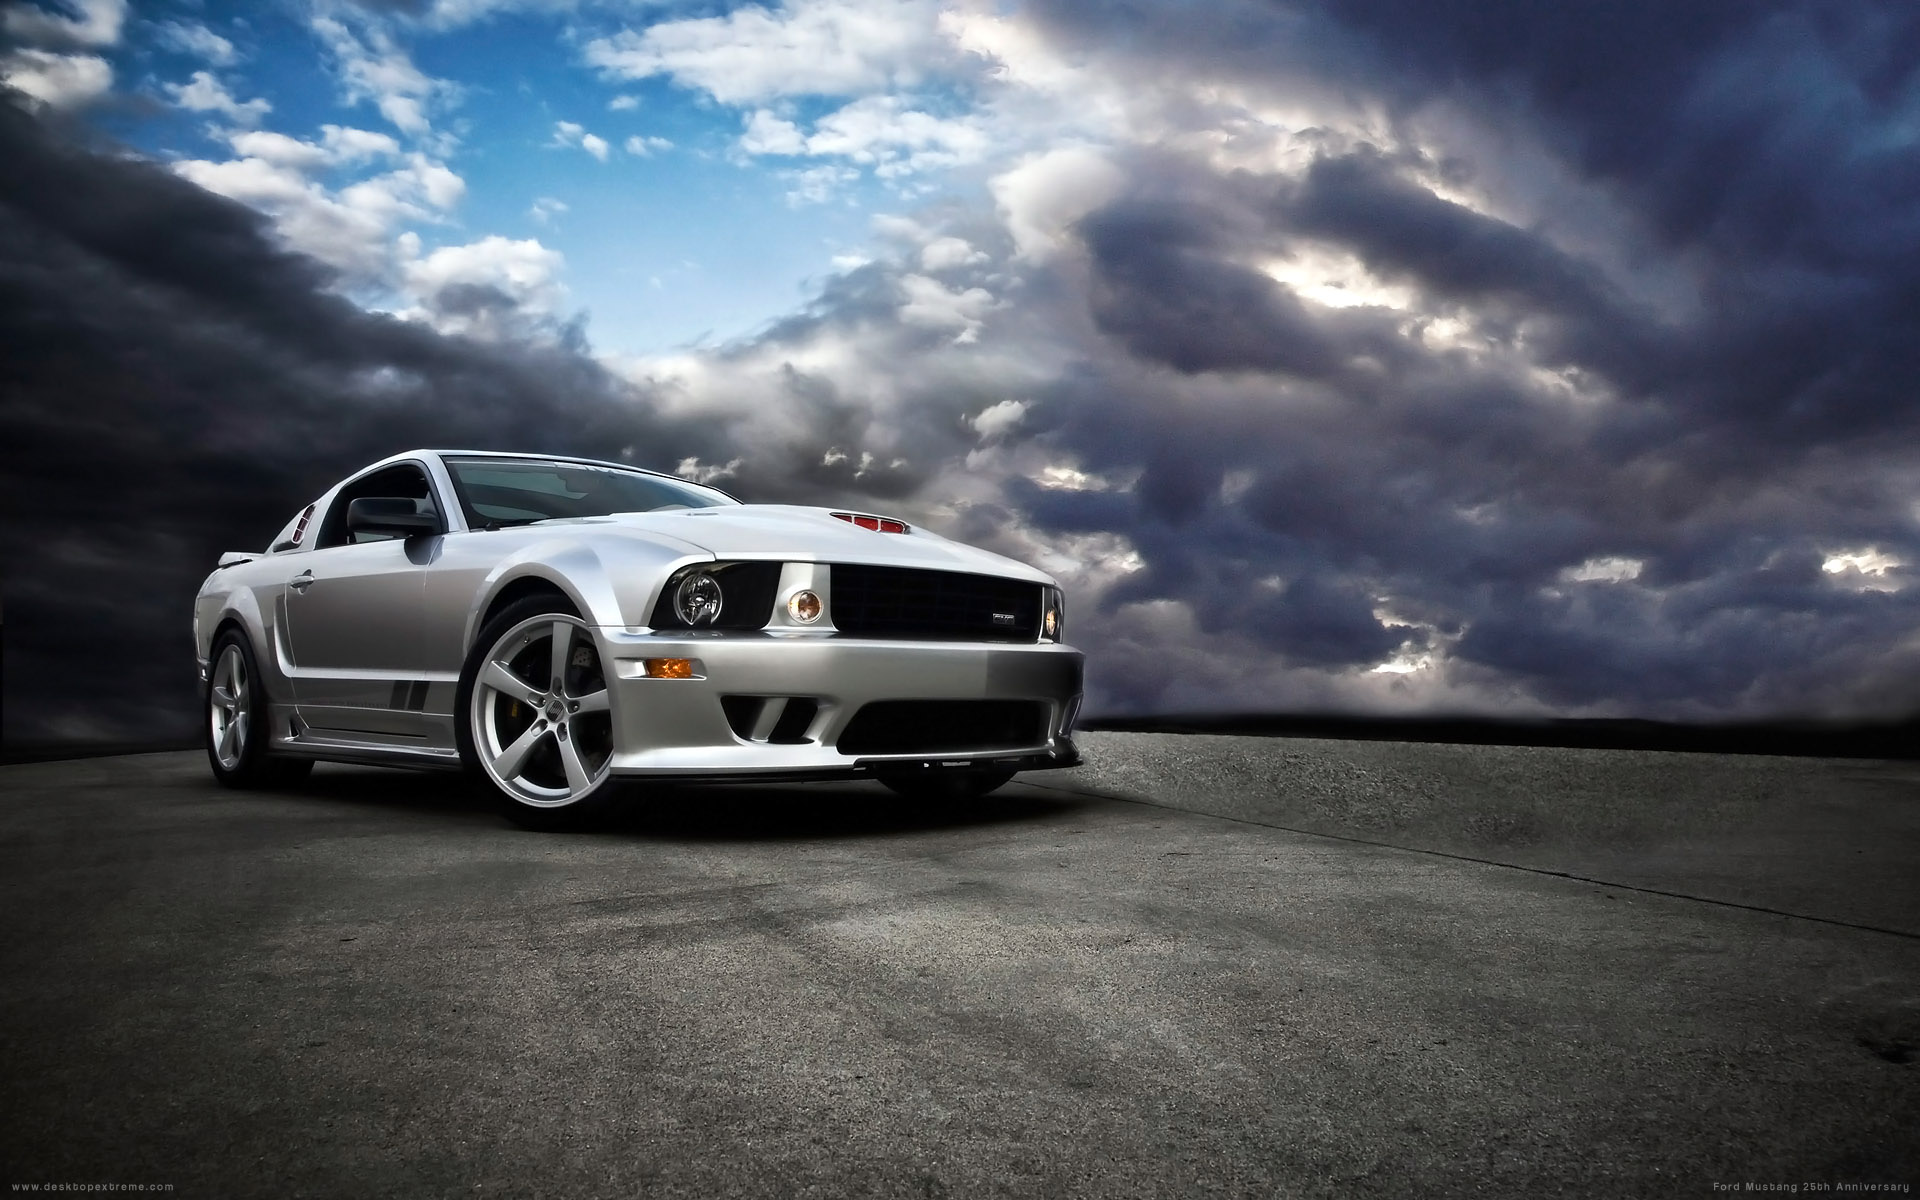 Ford Mustang Wallpapers Hd Wallpaper - Car And Road Background , HD Wallpaper & Backgrounds